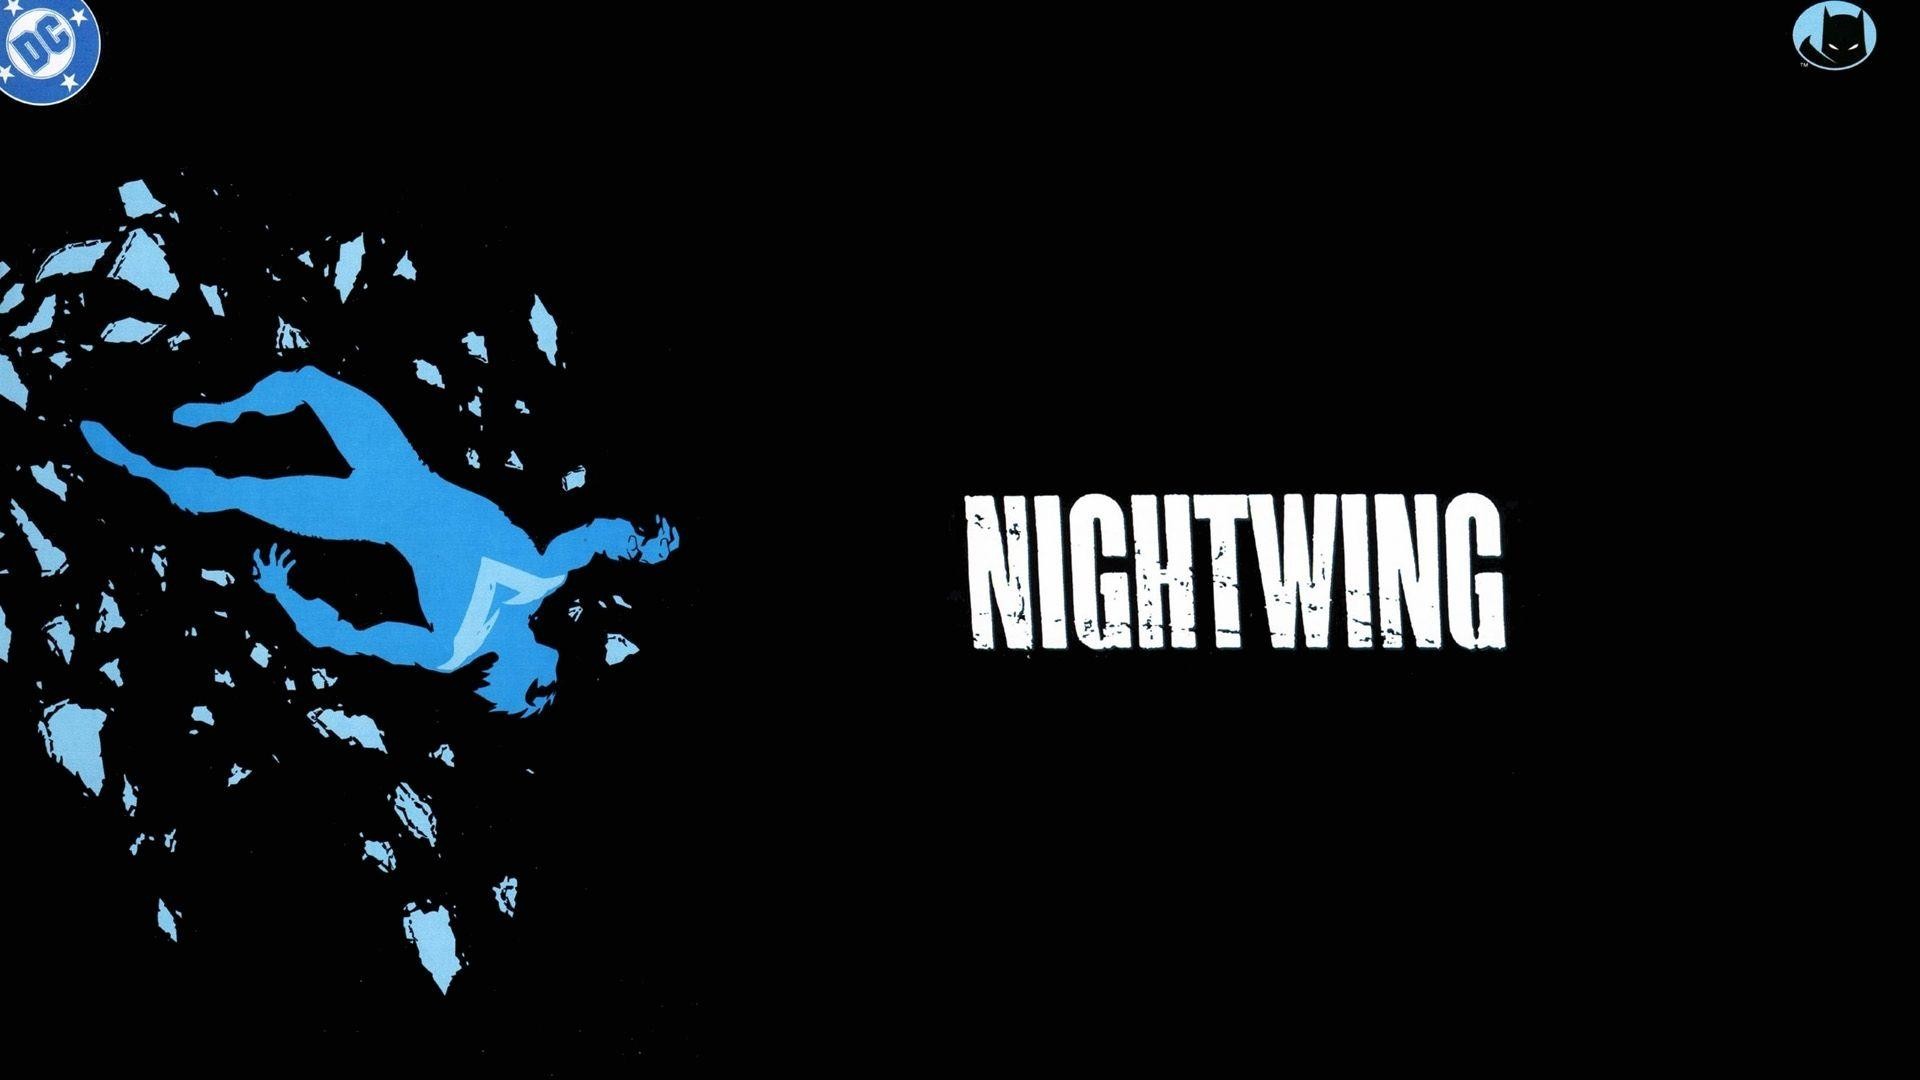 1920x1080 Wallpapers For > Nightwing Wallpaper 